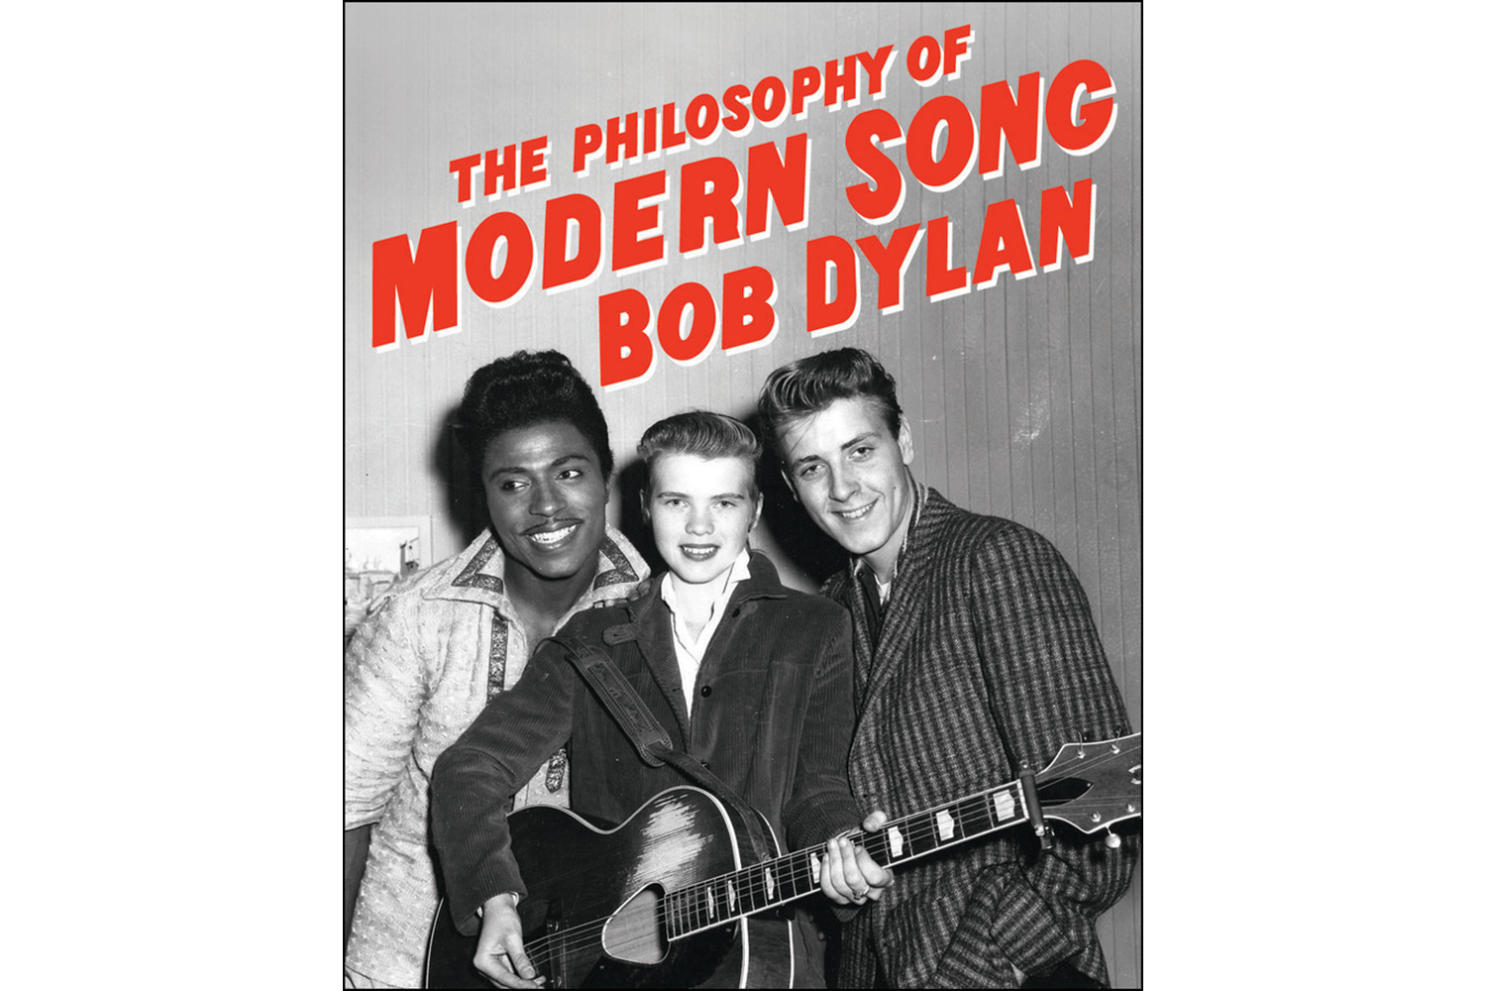 Bob Dylan’s latest book, “The Philosophy of Modern Song,” released soon